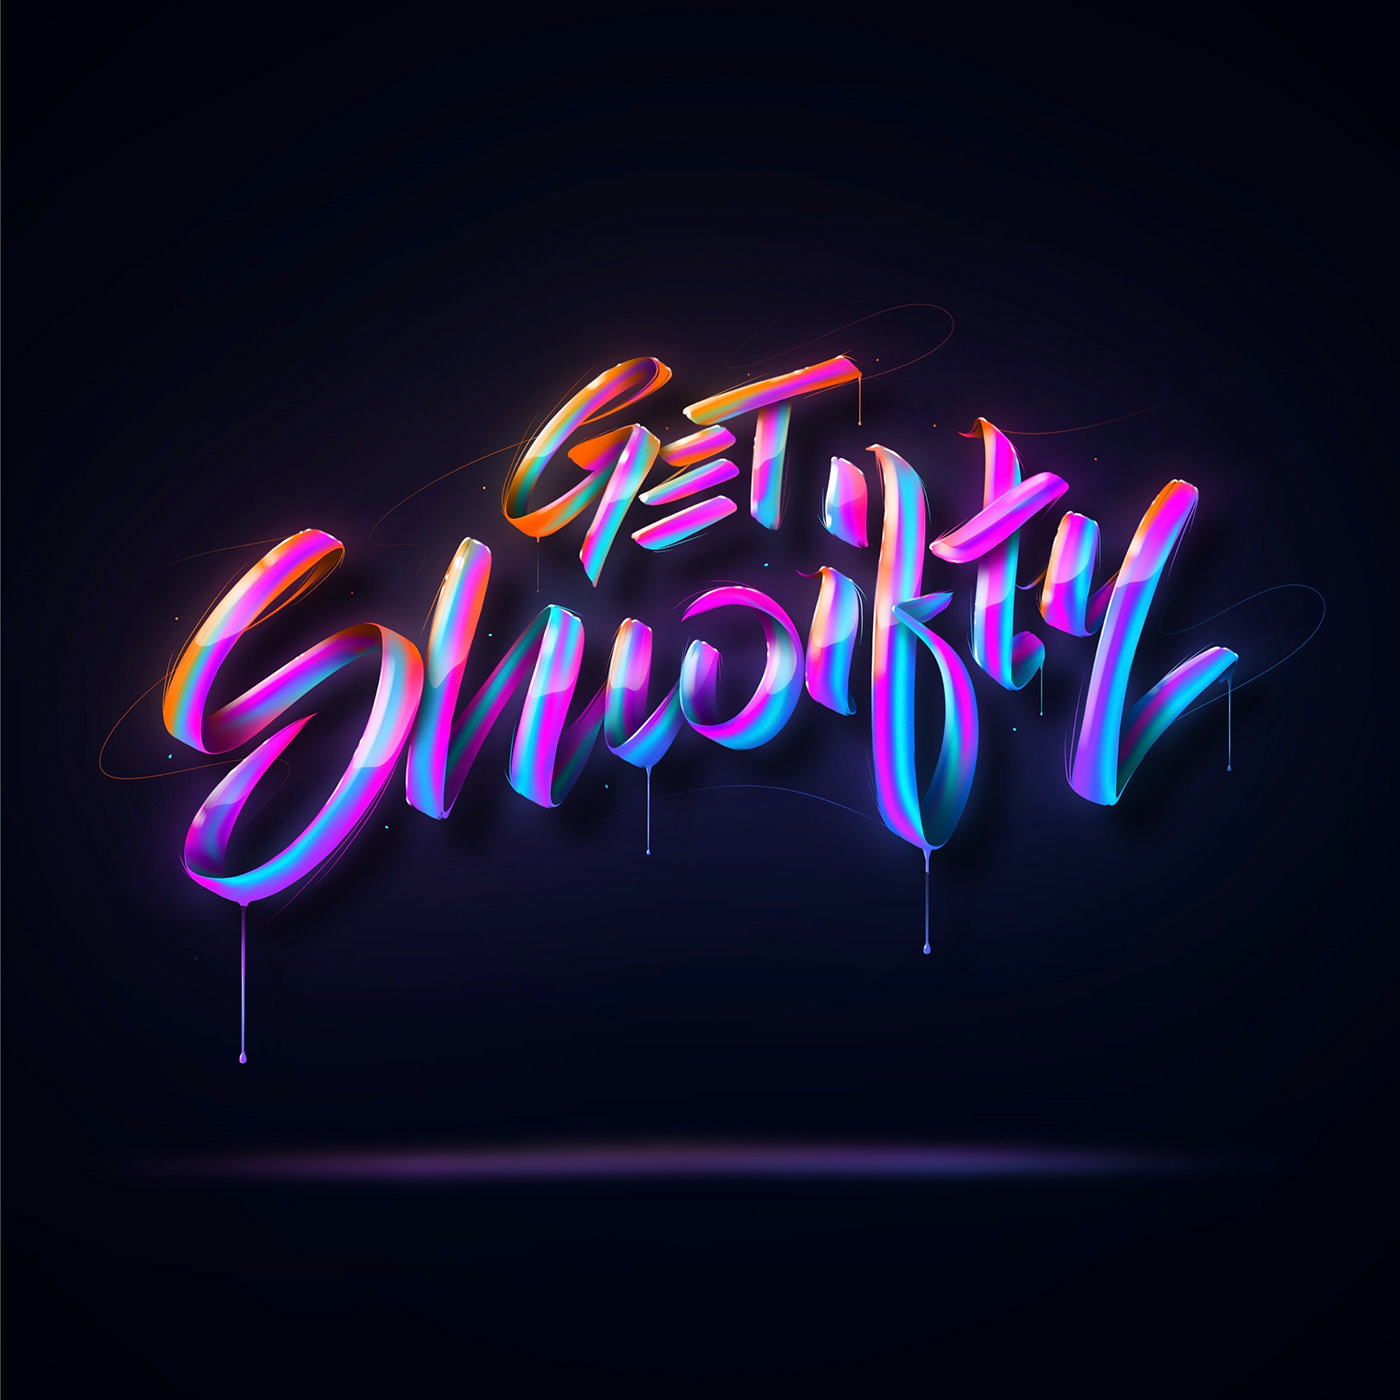 Calligraphy   colorful Digital Art  digital calligraphy graphic design  iPad Lettering lettering strokes type design typography  